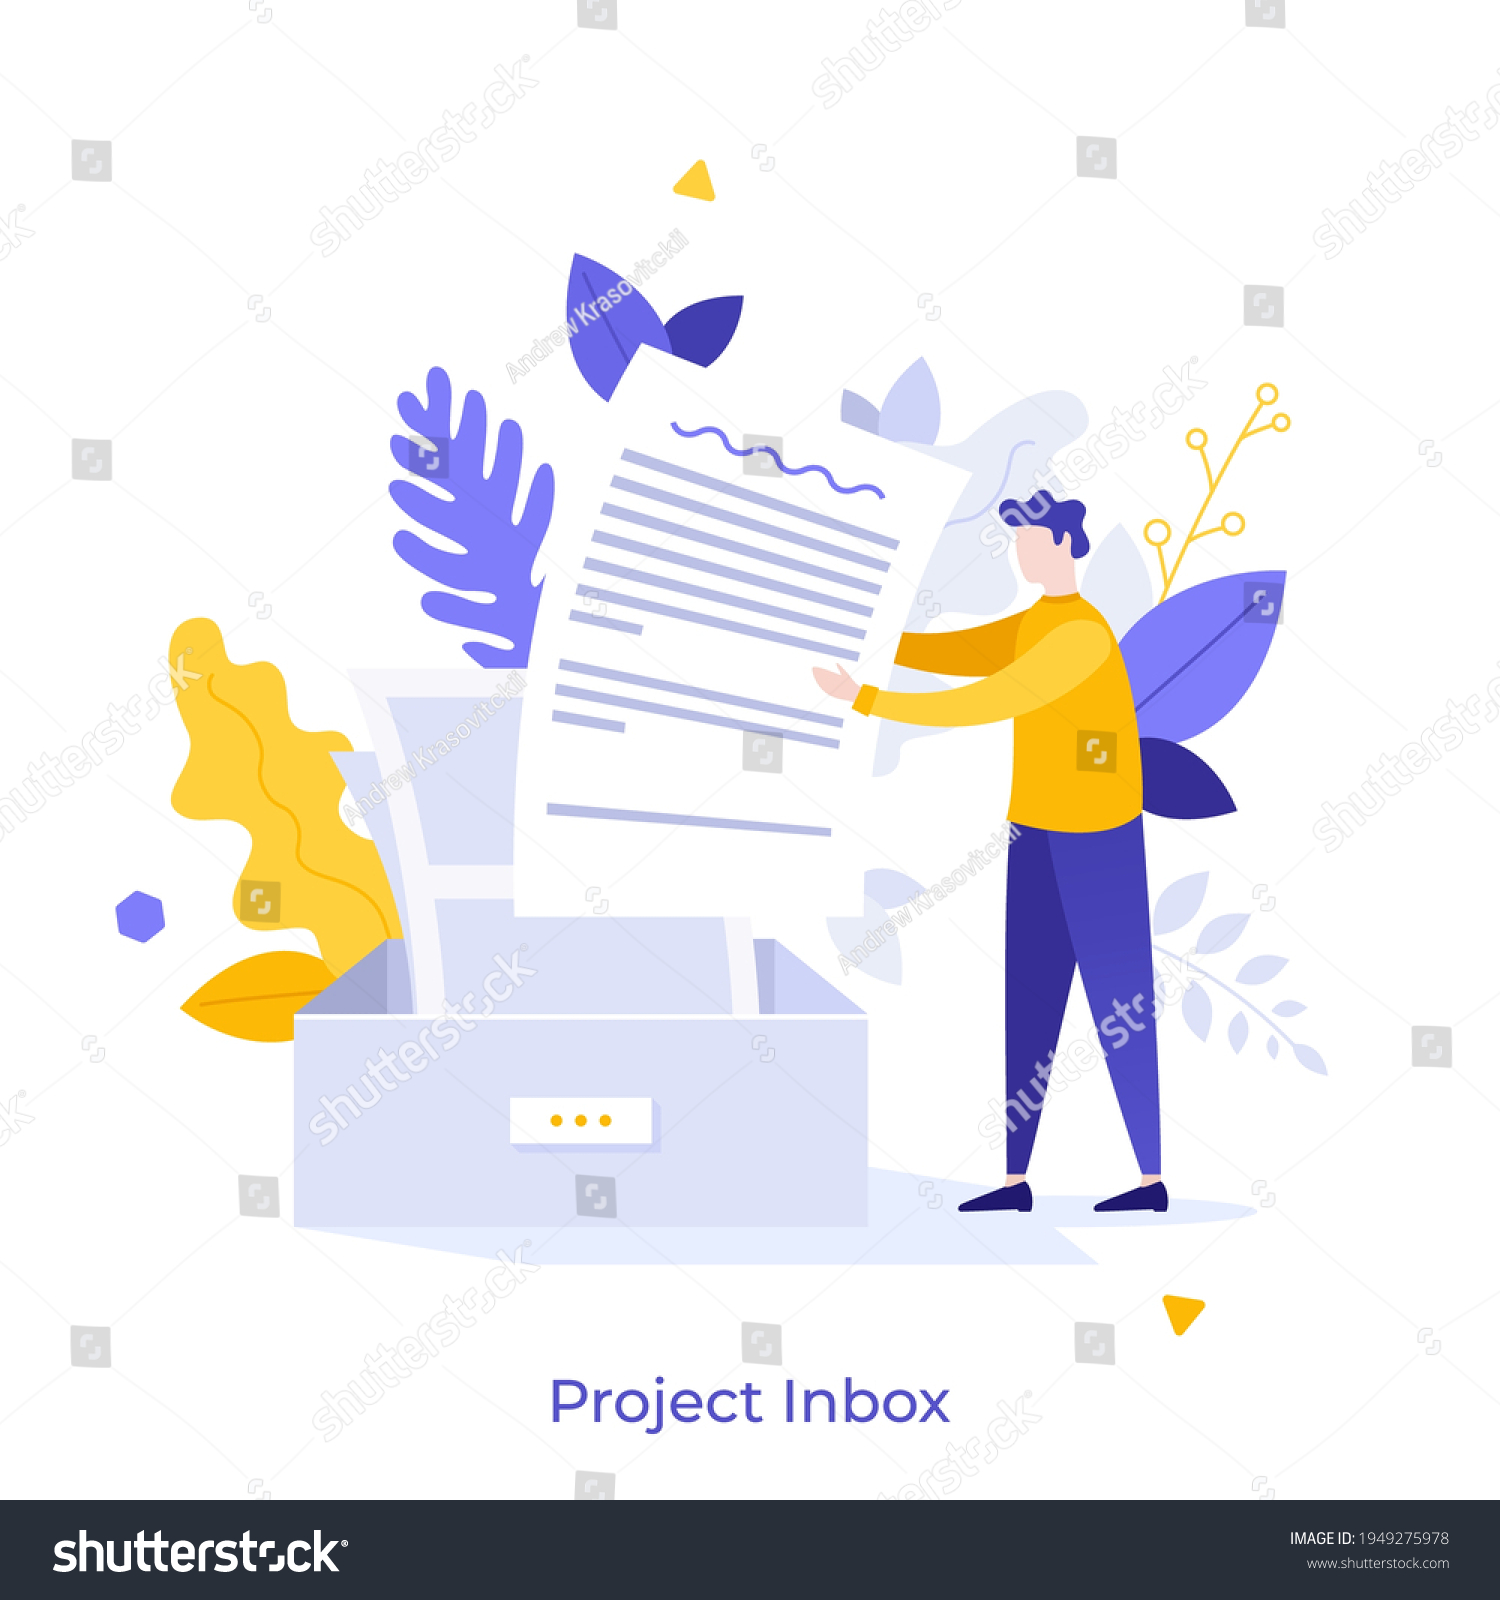 Man putting letter or mail into box. Concept of business project inbox, mailbox, email, electronic address for communication or correspondence. Modern flat colorful vector illustration for banner. #1949275978